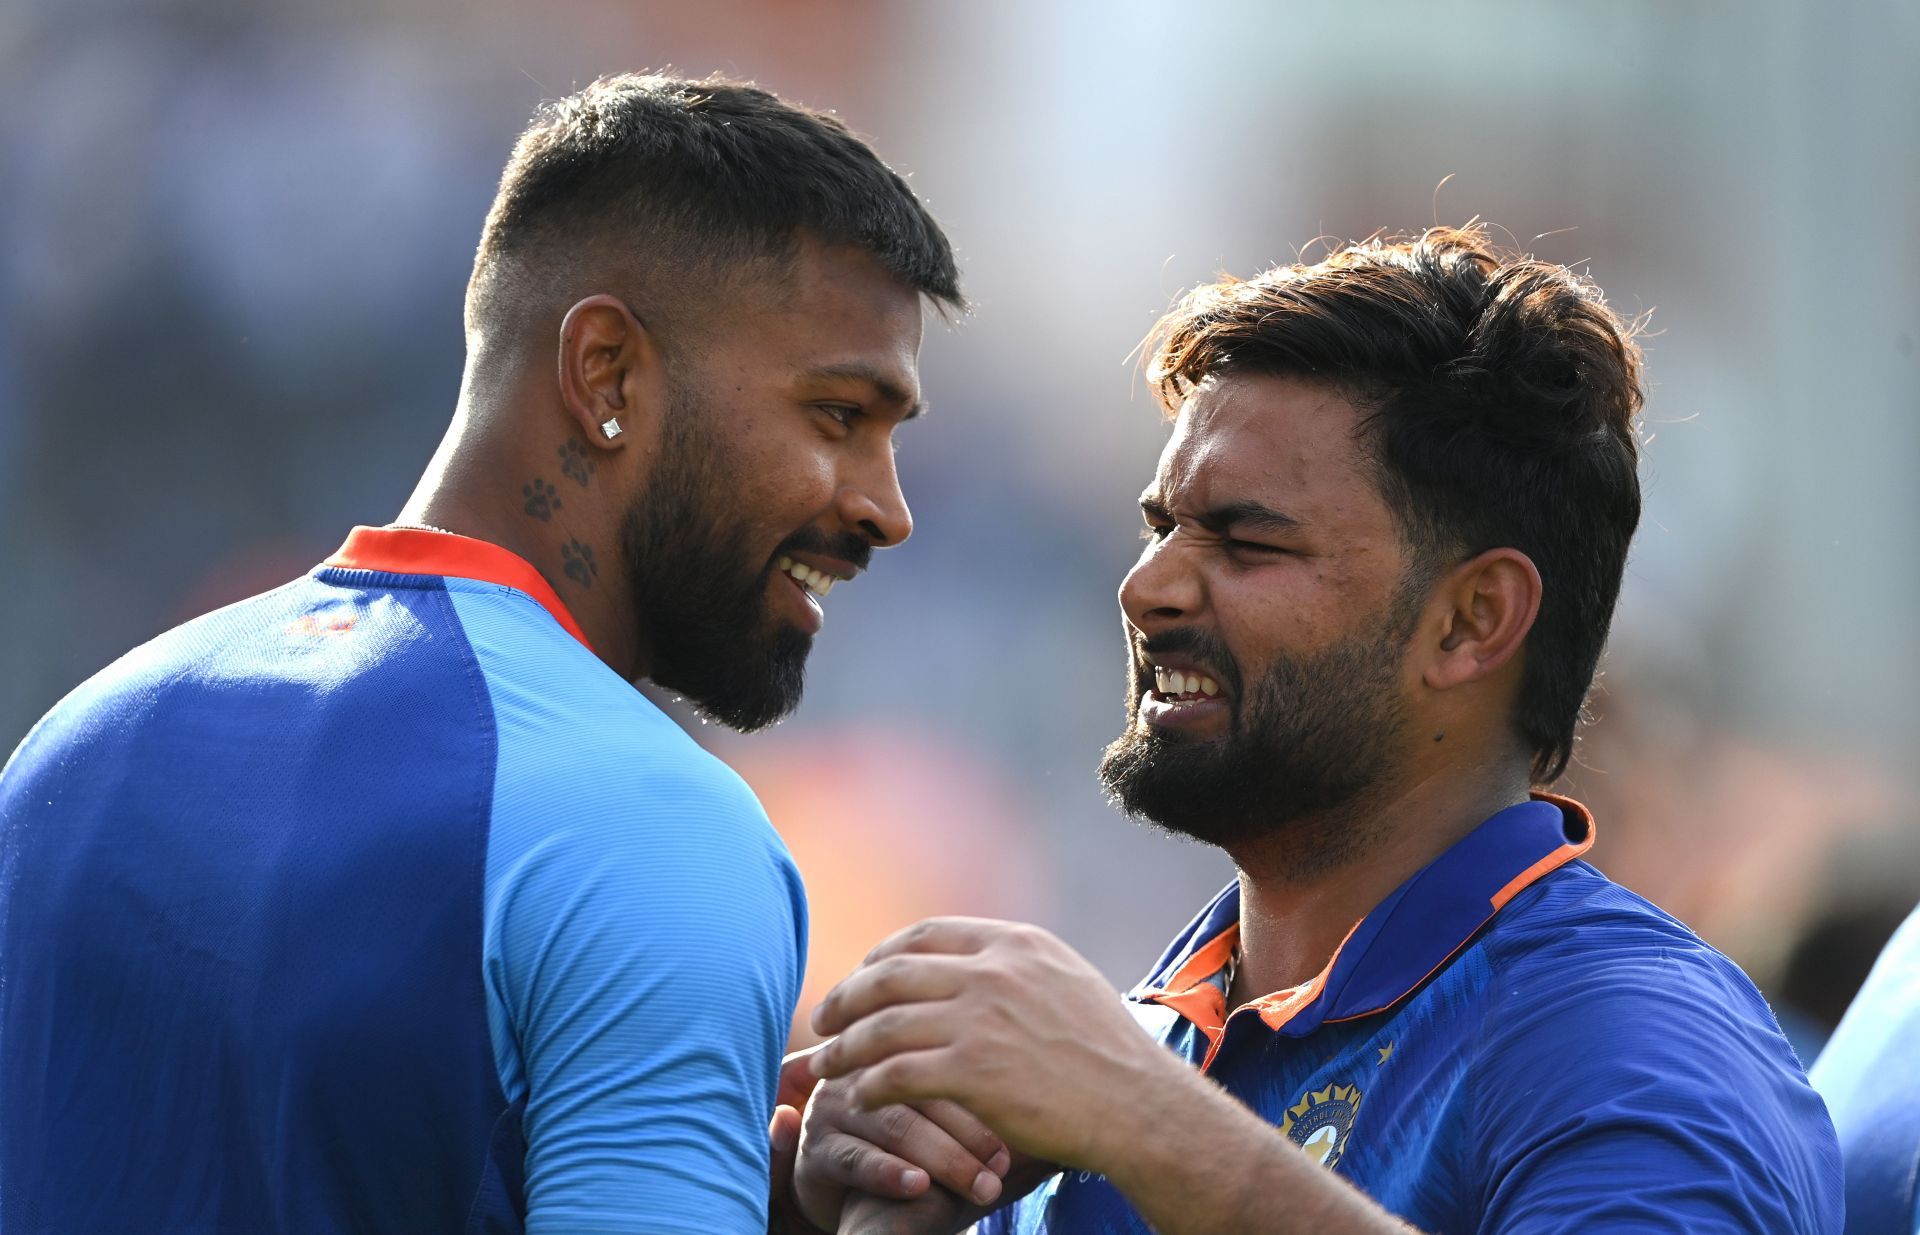 Pant and Pandya combined to give the Men in Blue the series win